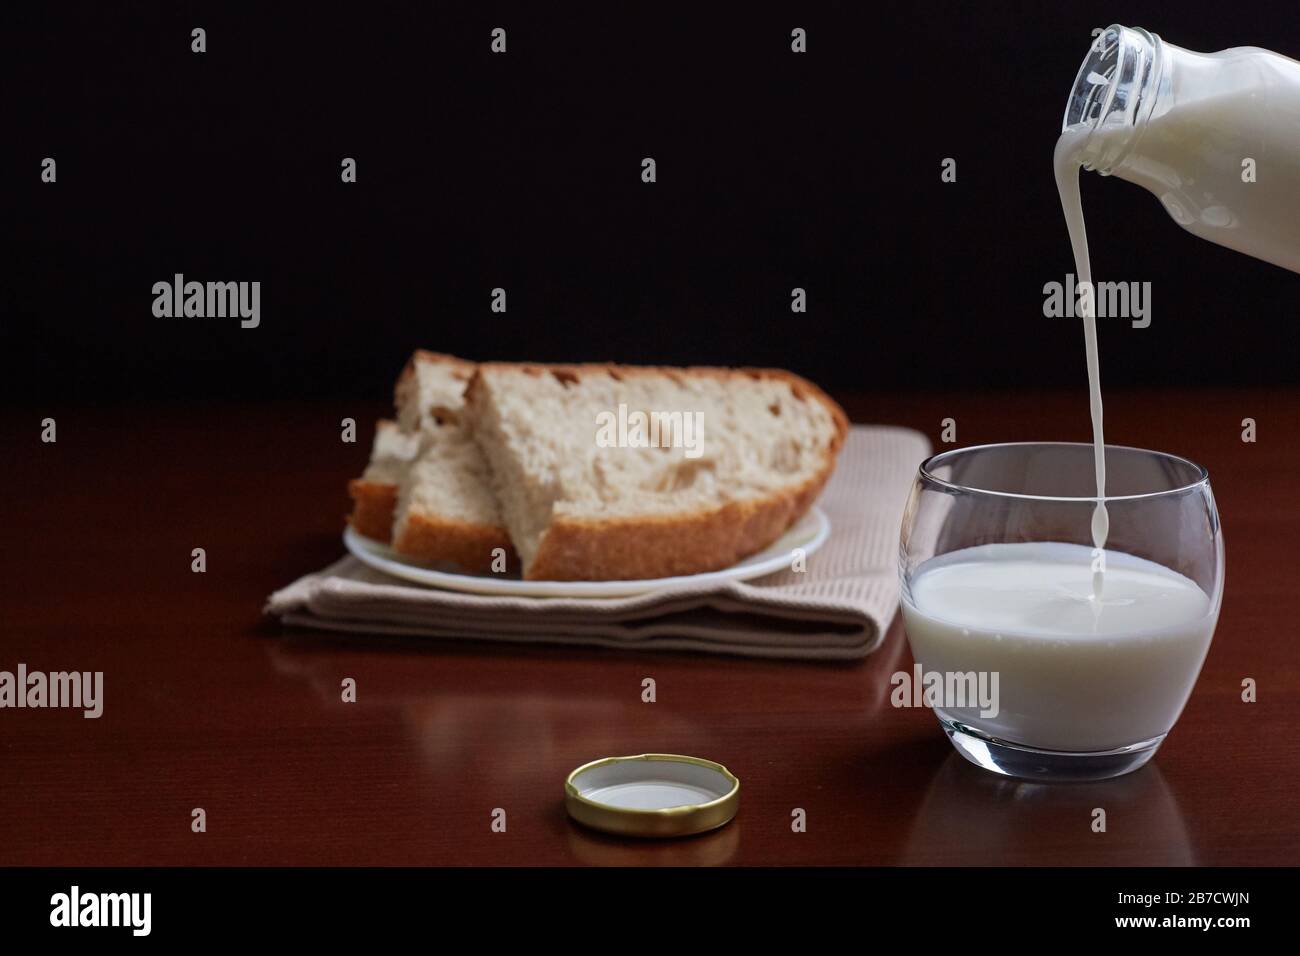 Kefir from a bottle flows into a glass. Bread in the background. Dark background and brown wooden table. Stock Photo